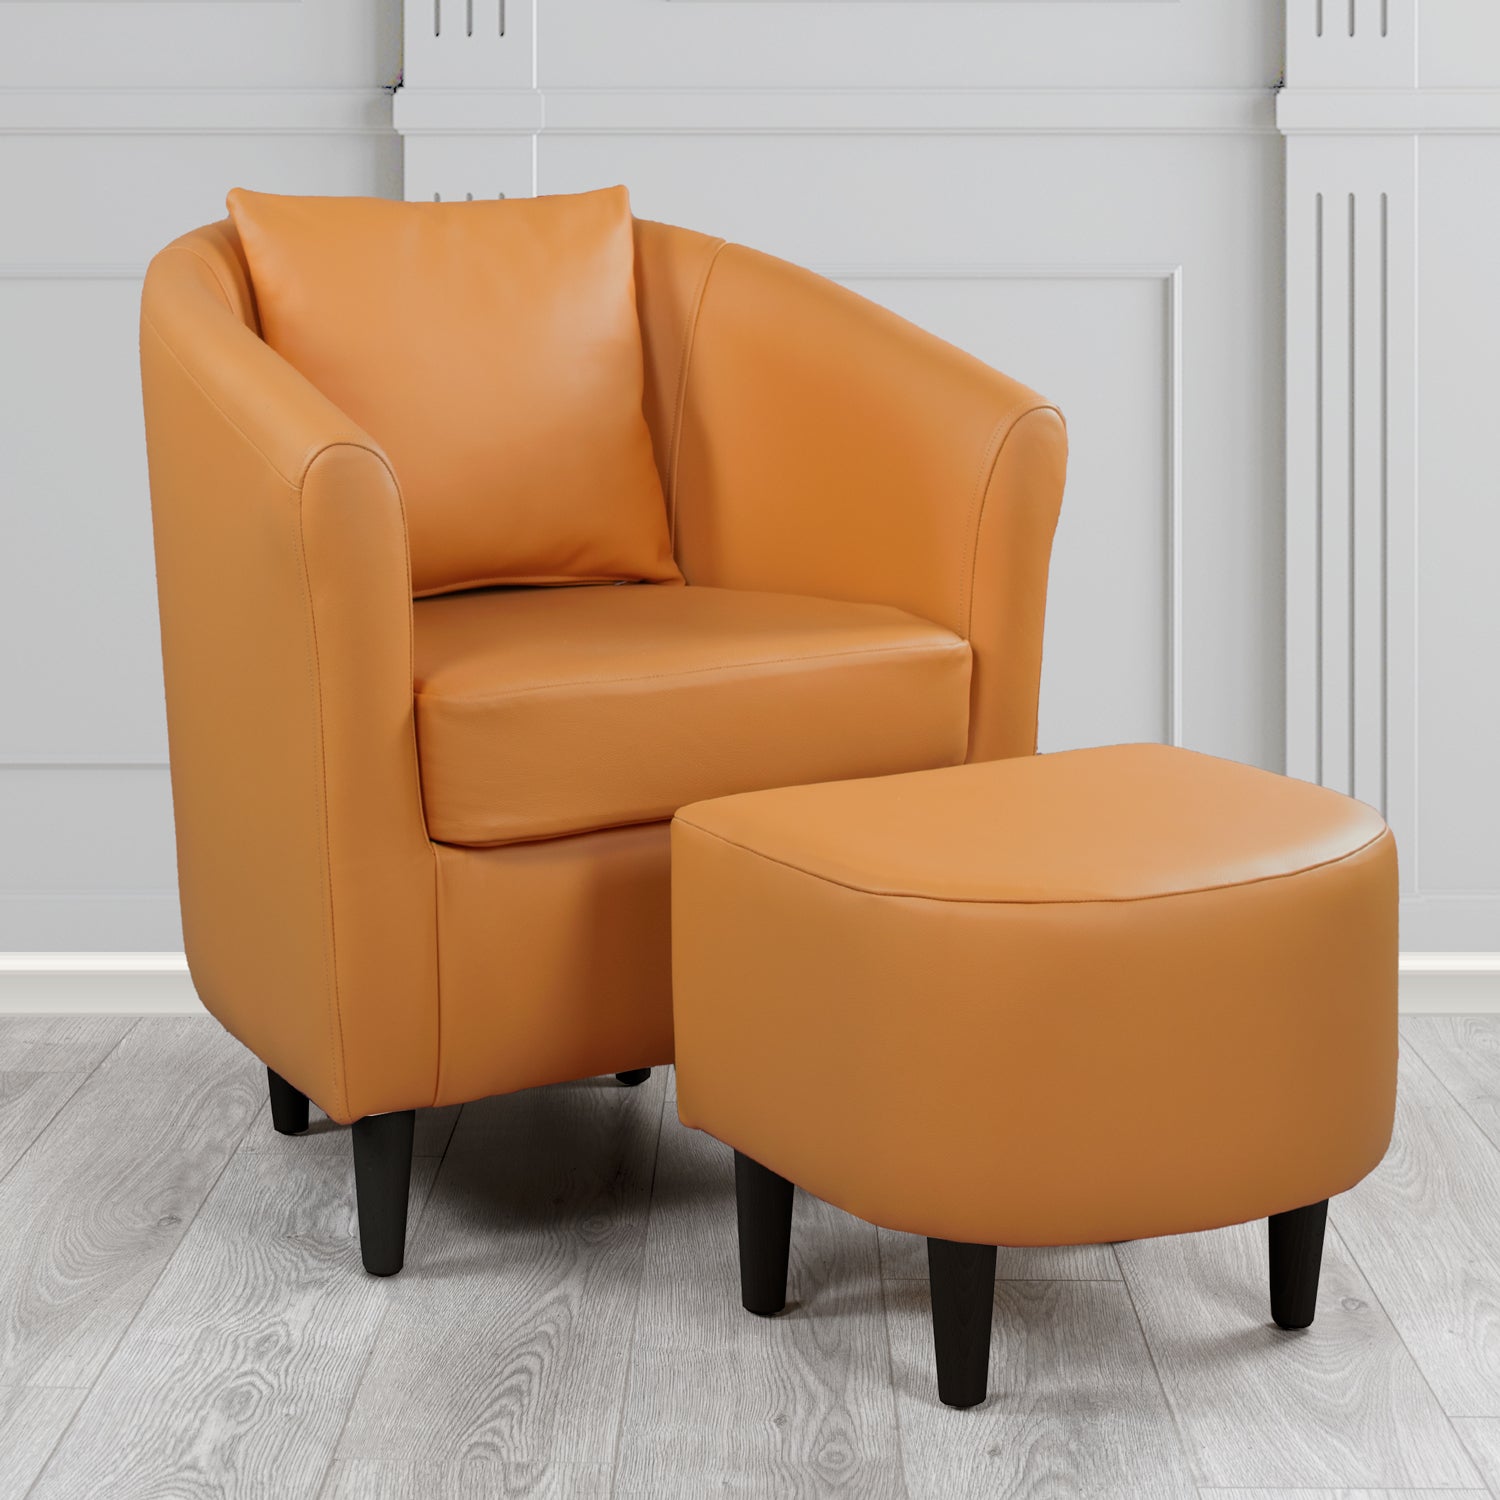 St Tropez Shelly Saddle Crib 5 Genuine Leather Tub Chair & Footstool Set With Scatter Cushion (6619518042154)